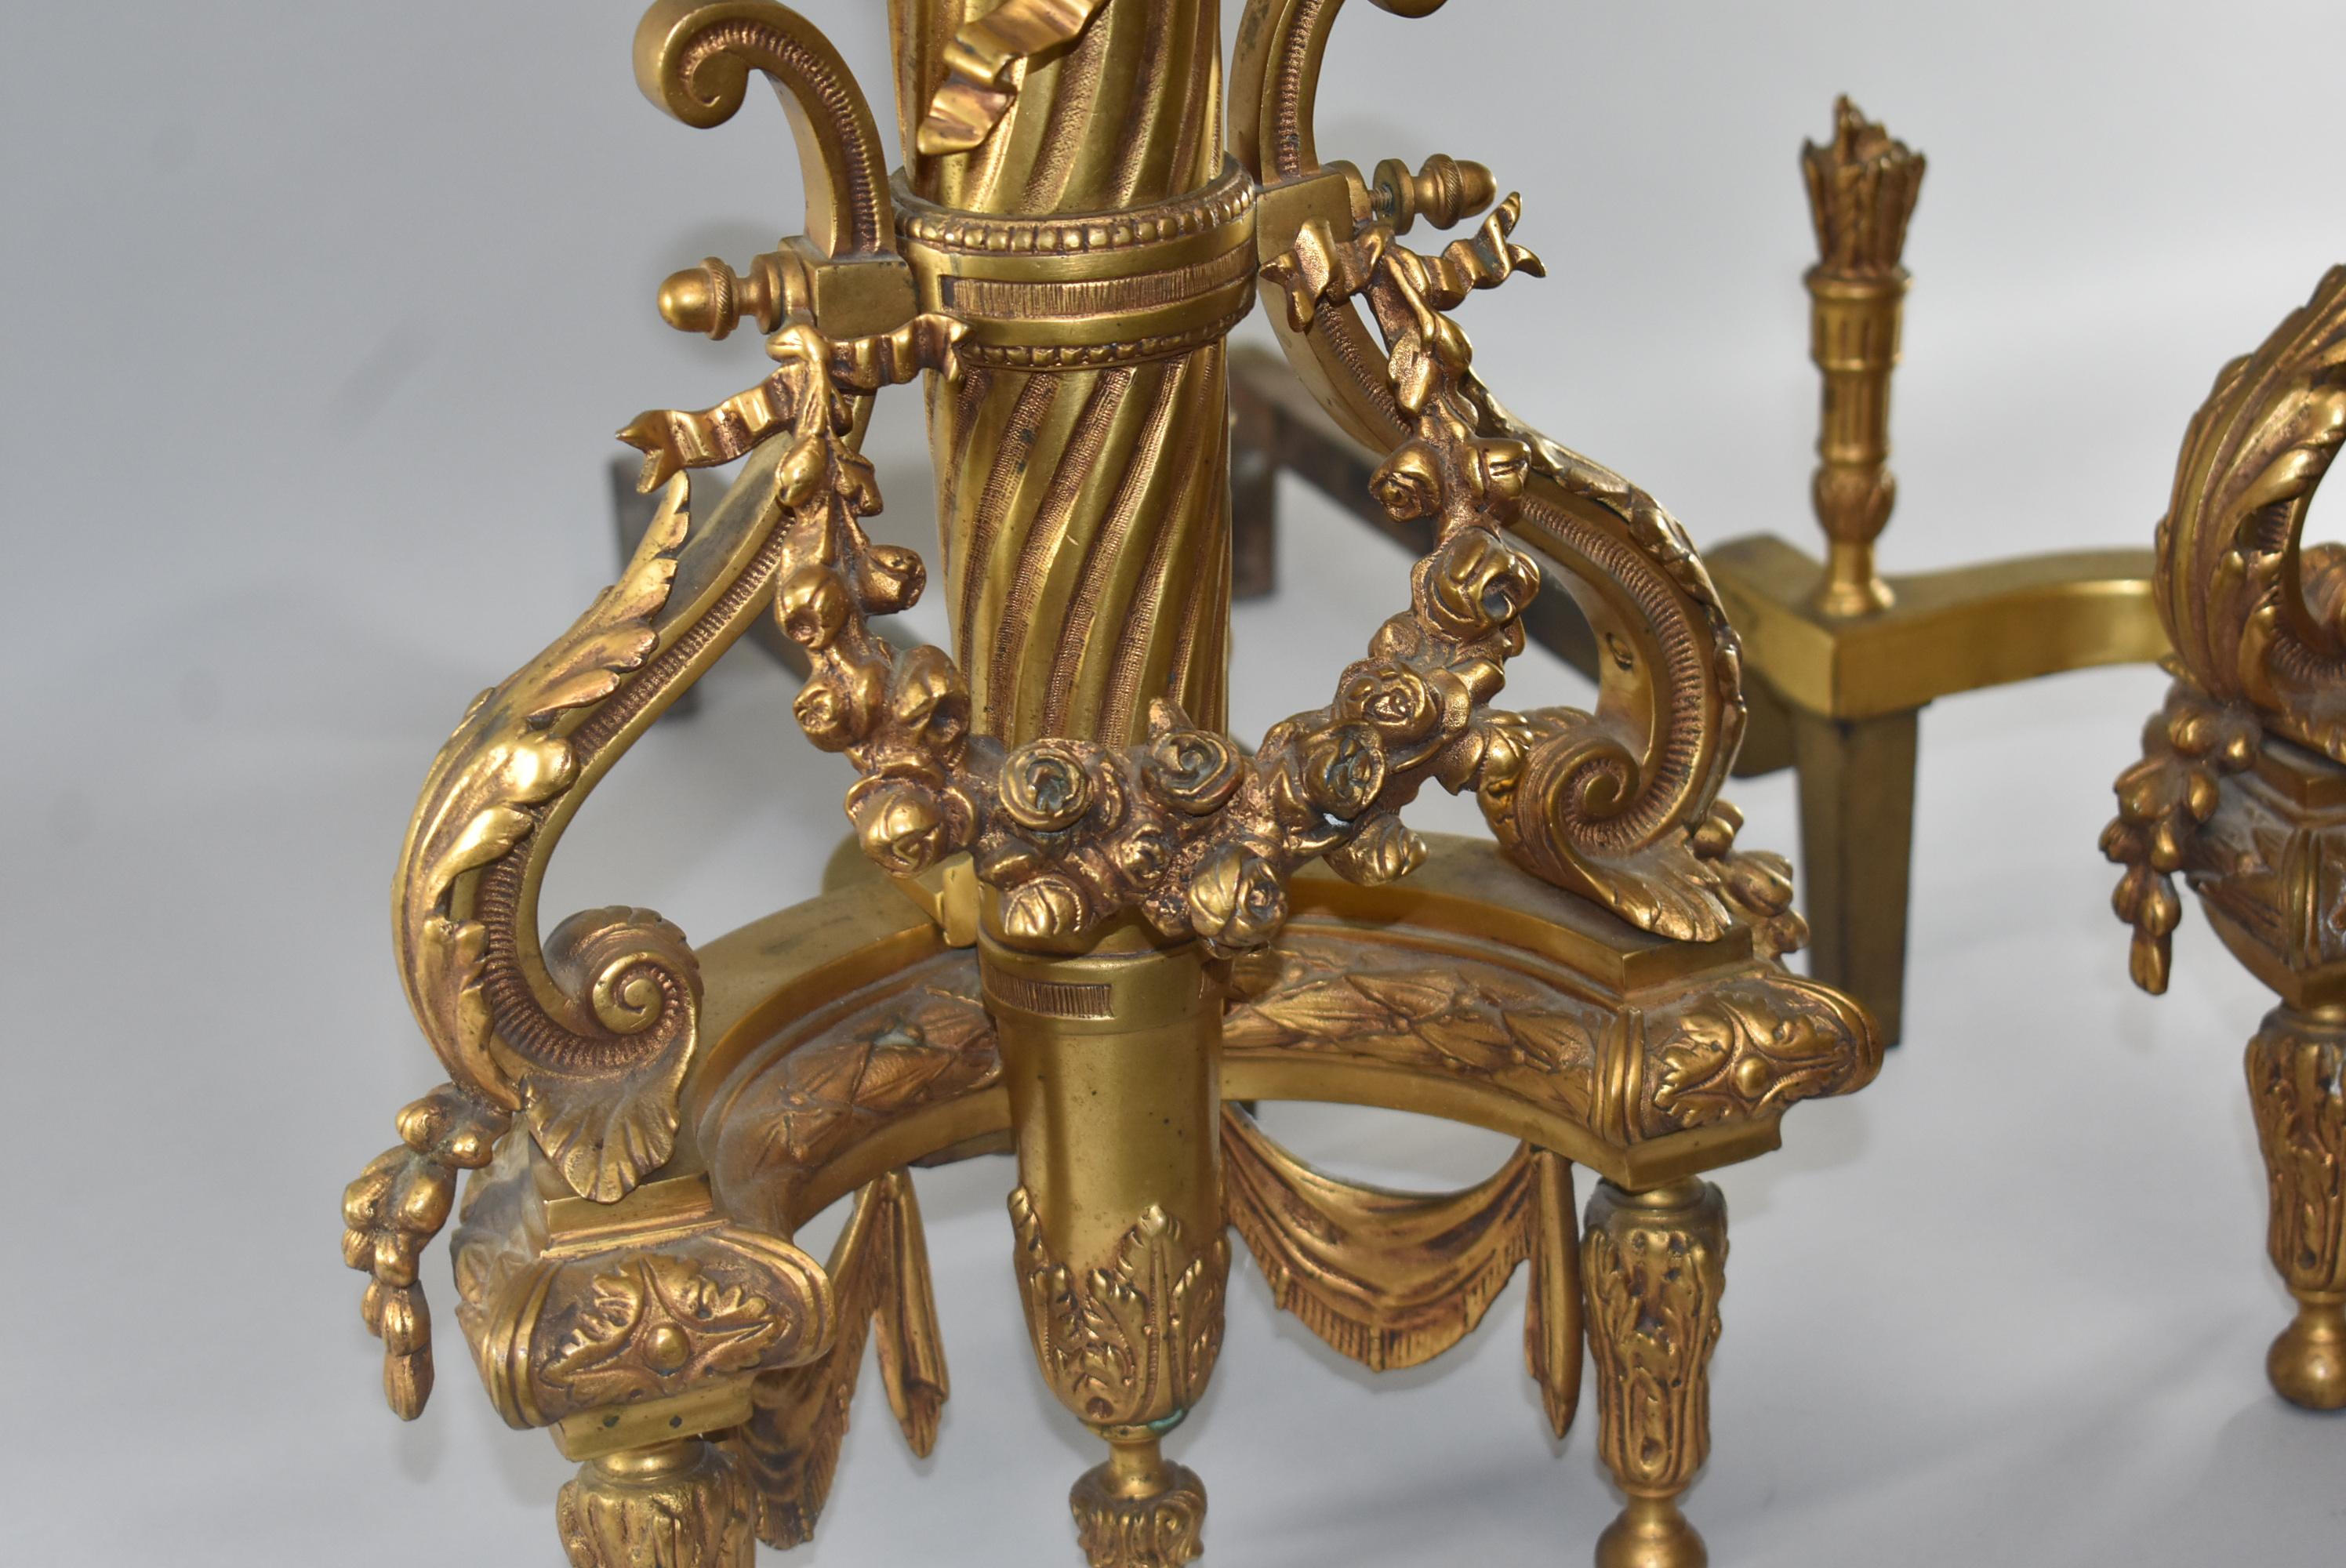 Pair of gold doré' French andirons with arrow and quiver details. Very nice condition. Dimensions: 24